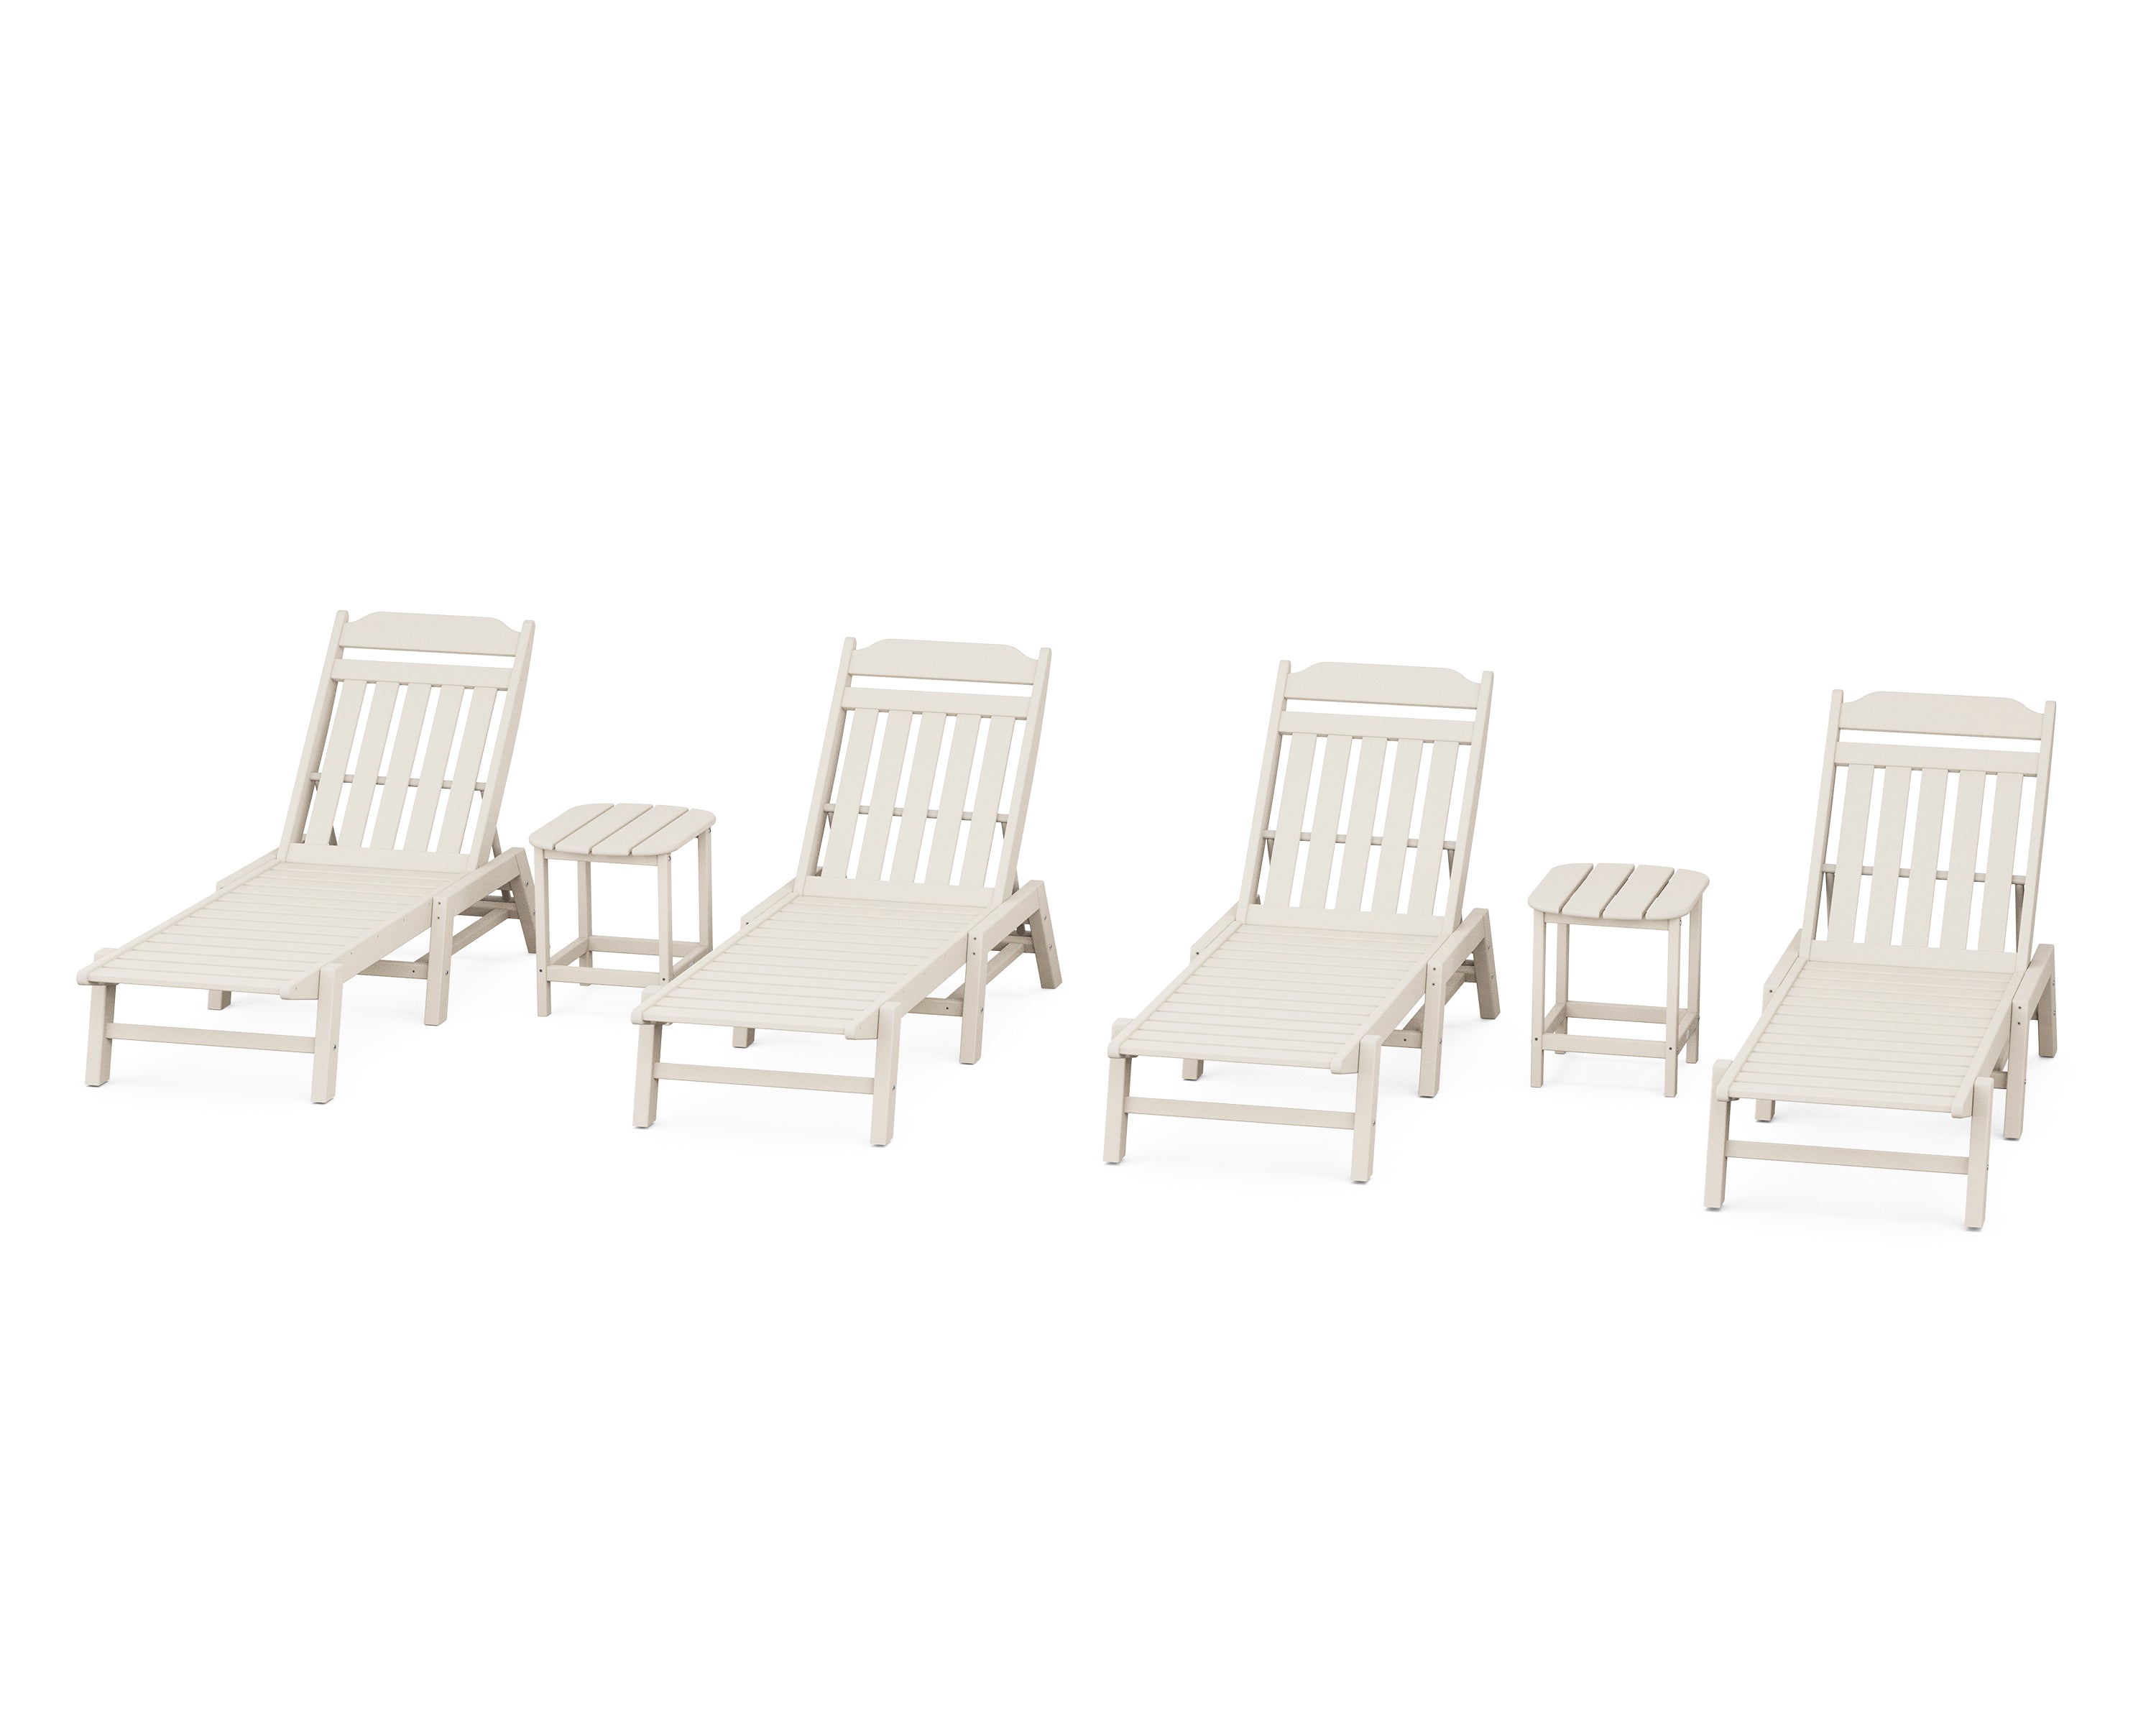 POLYWOOD Country Living 6-Piece Chaise Set in Sand